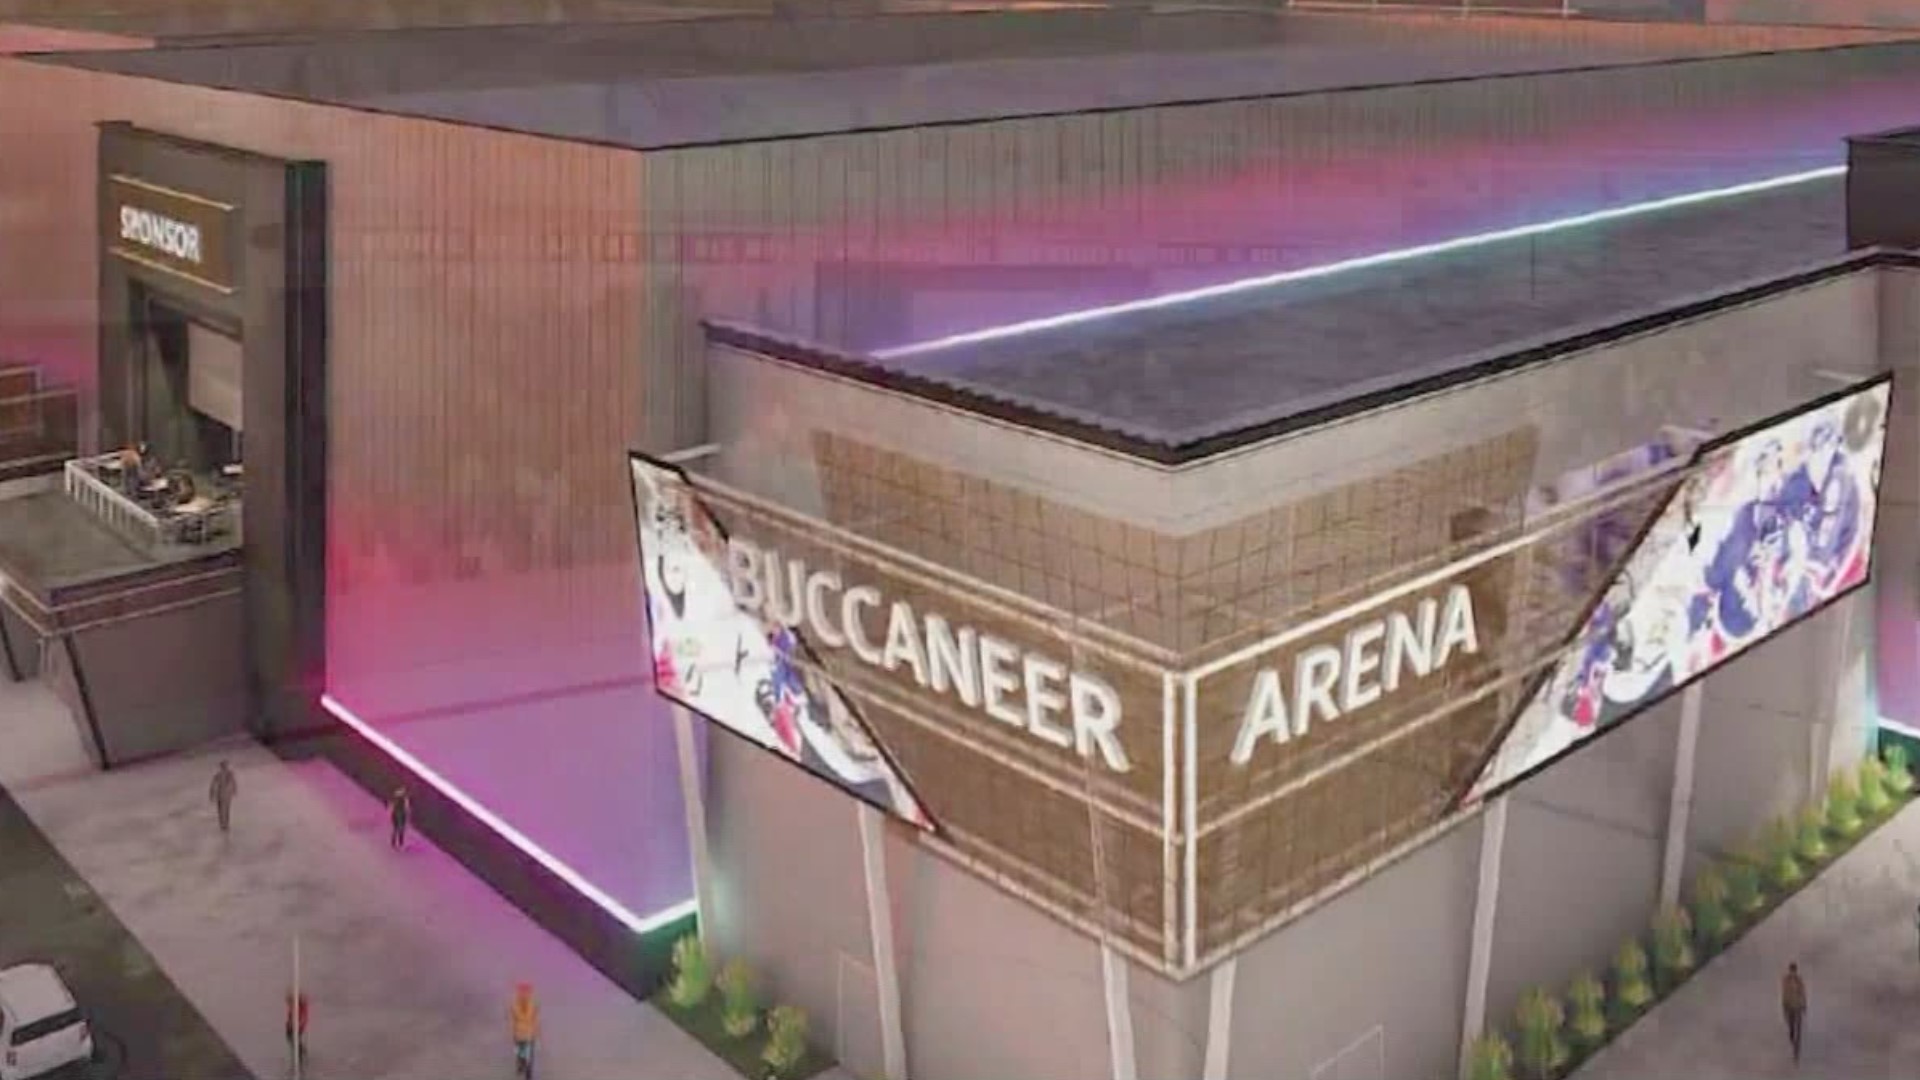 The hockey team announced a new 3,500 seat multi-purpose arena will be built in the former Younkers store on the west side of the shopping center.